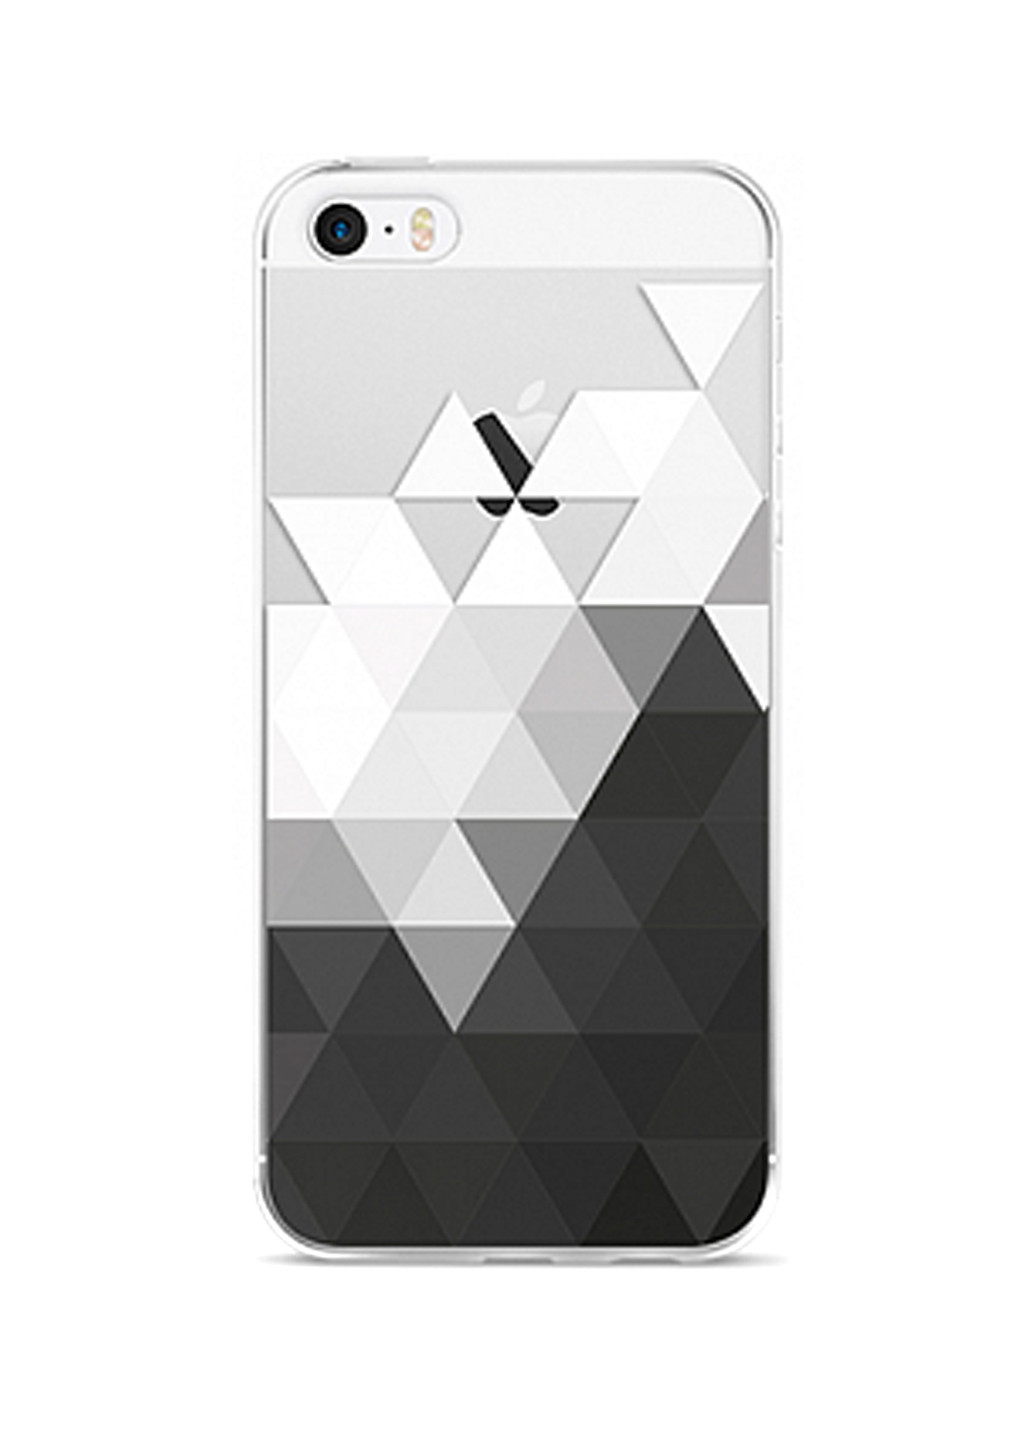 Чехол Transperency Case for iPhone 5/5S/SE Triangle Pump transperency case для iphone 5/5s/se triangle (136993918)